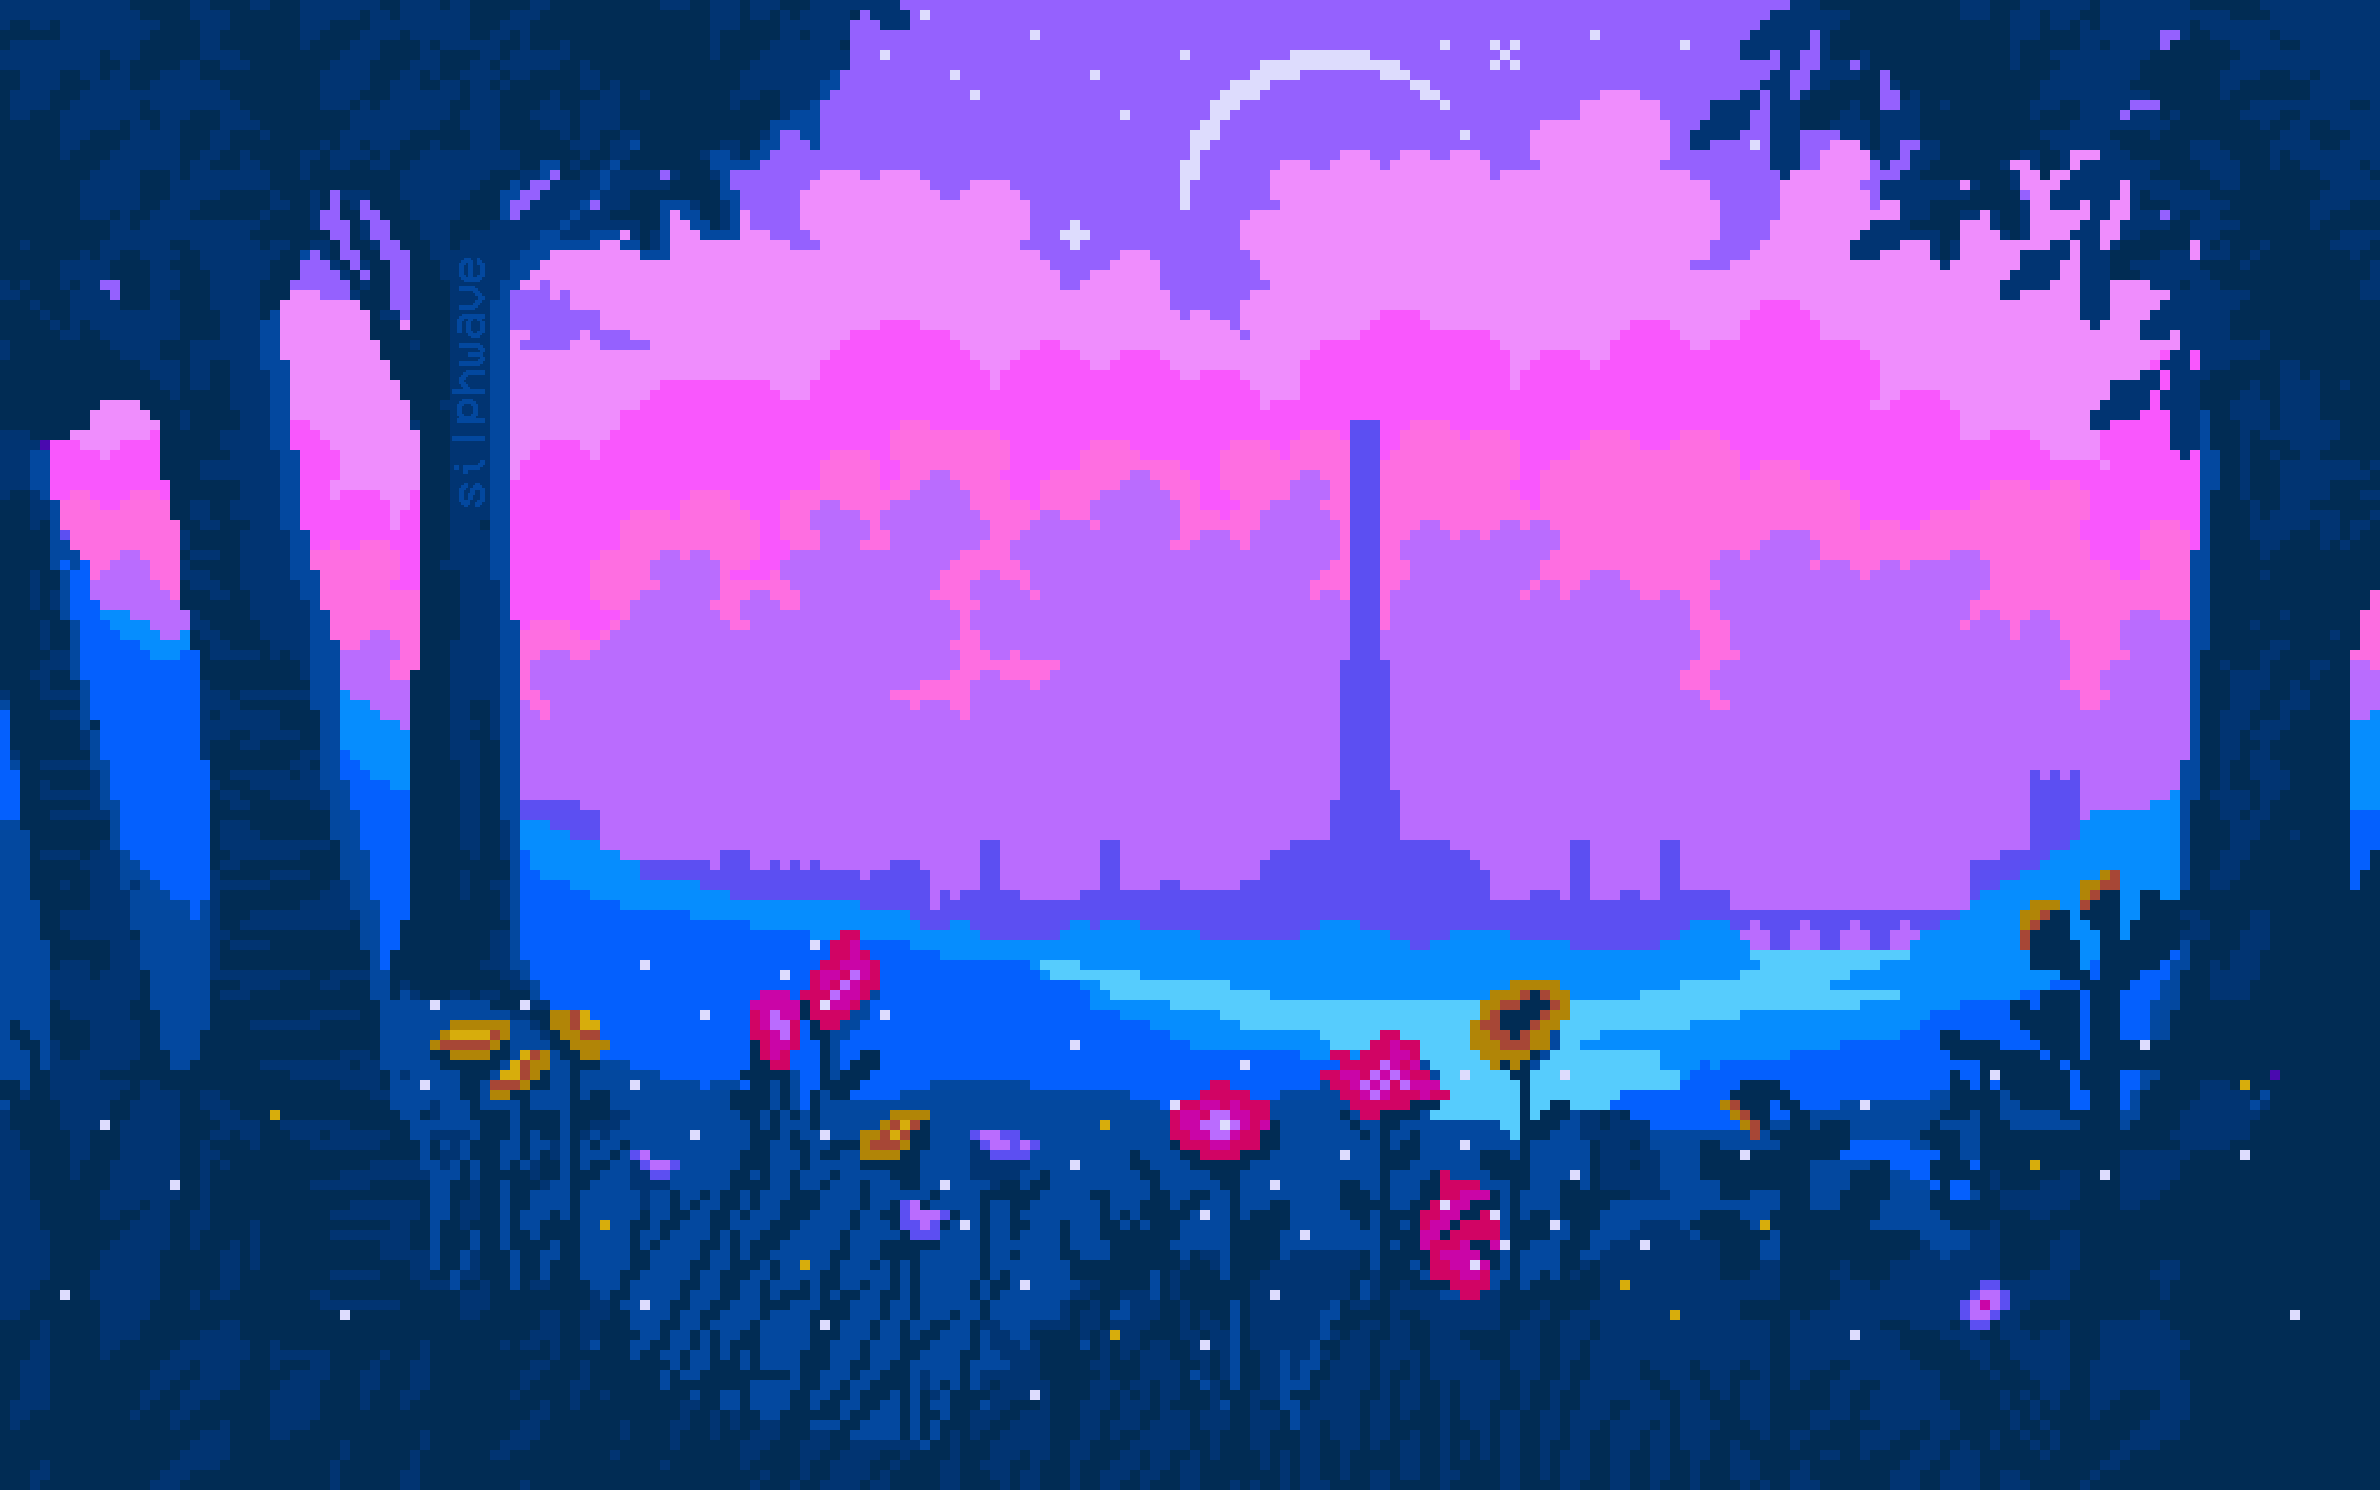 Pixel art of a forest with a city in the background - Pixel art